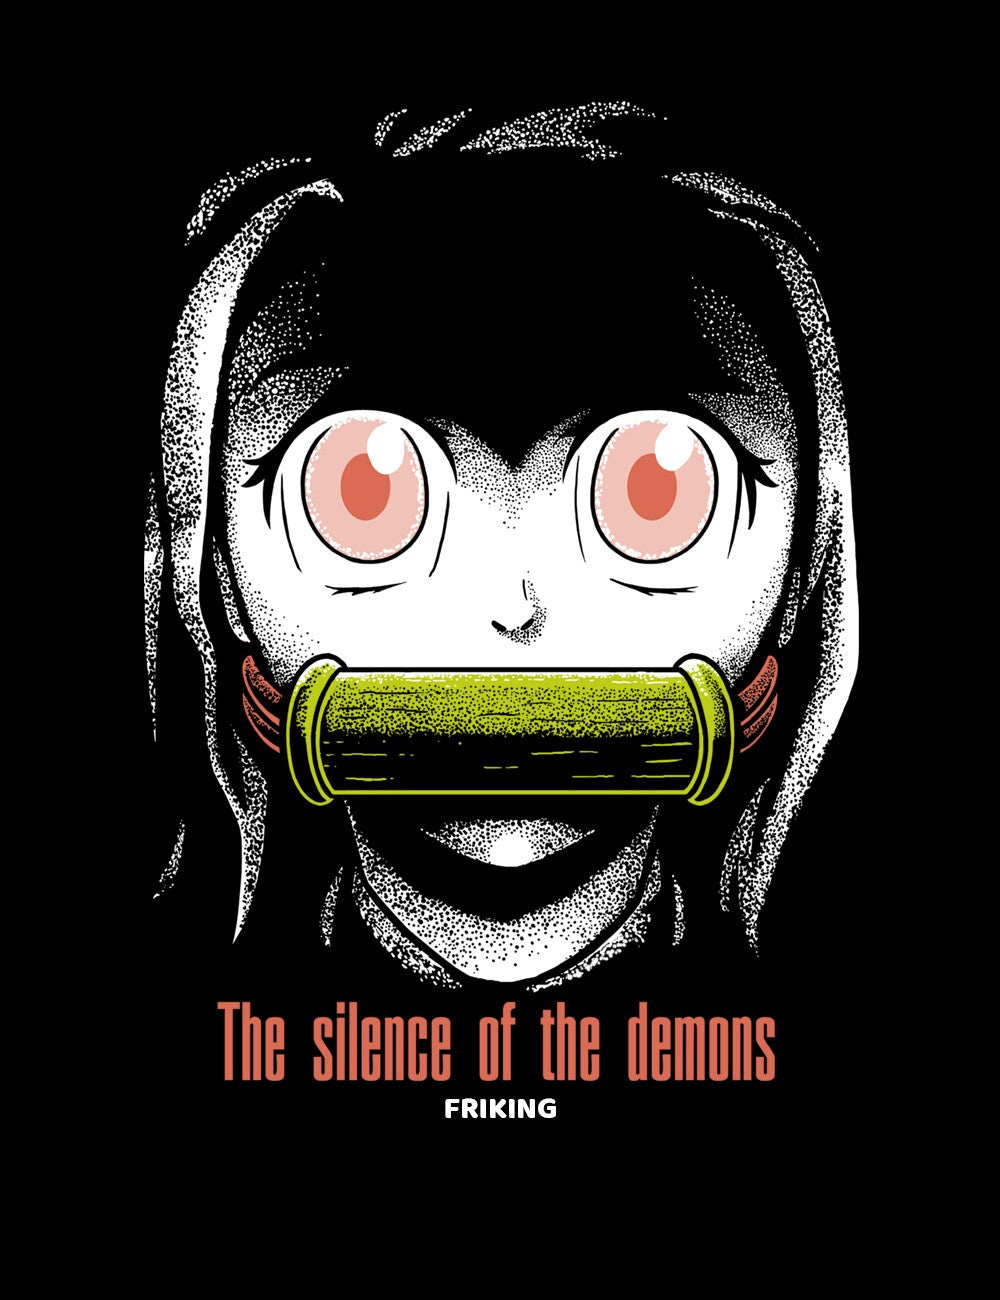 The silence of the demons